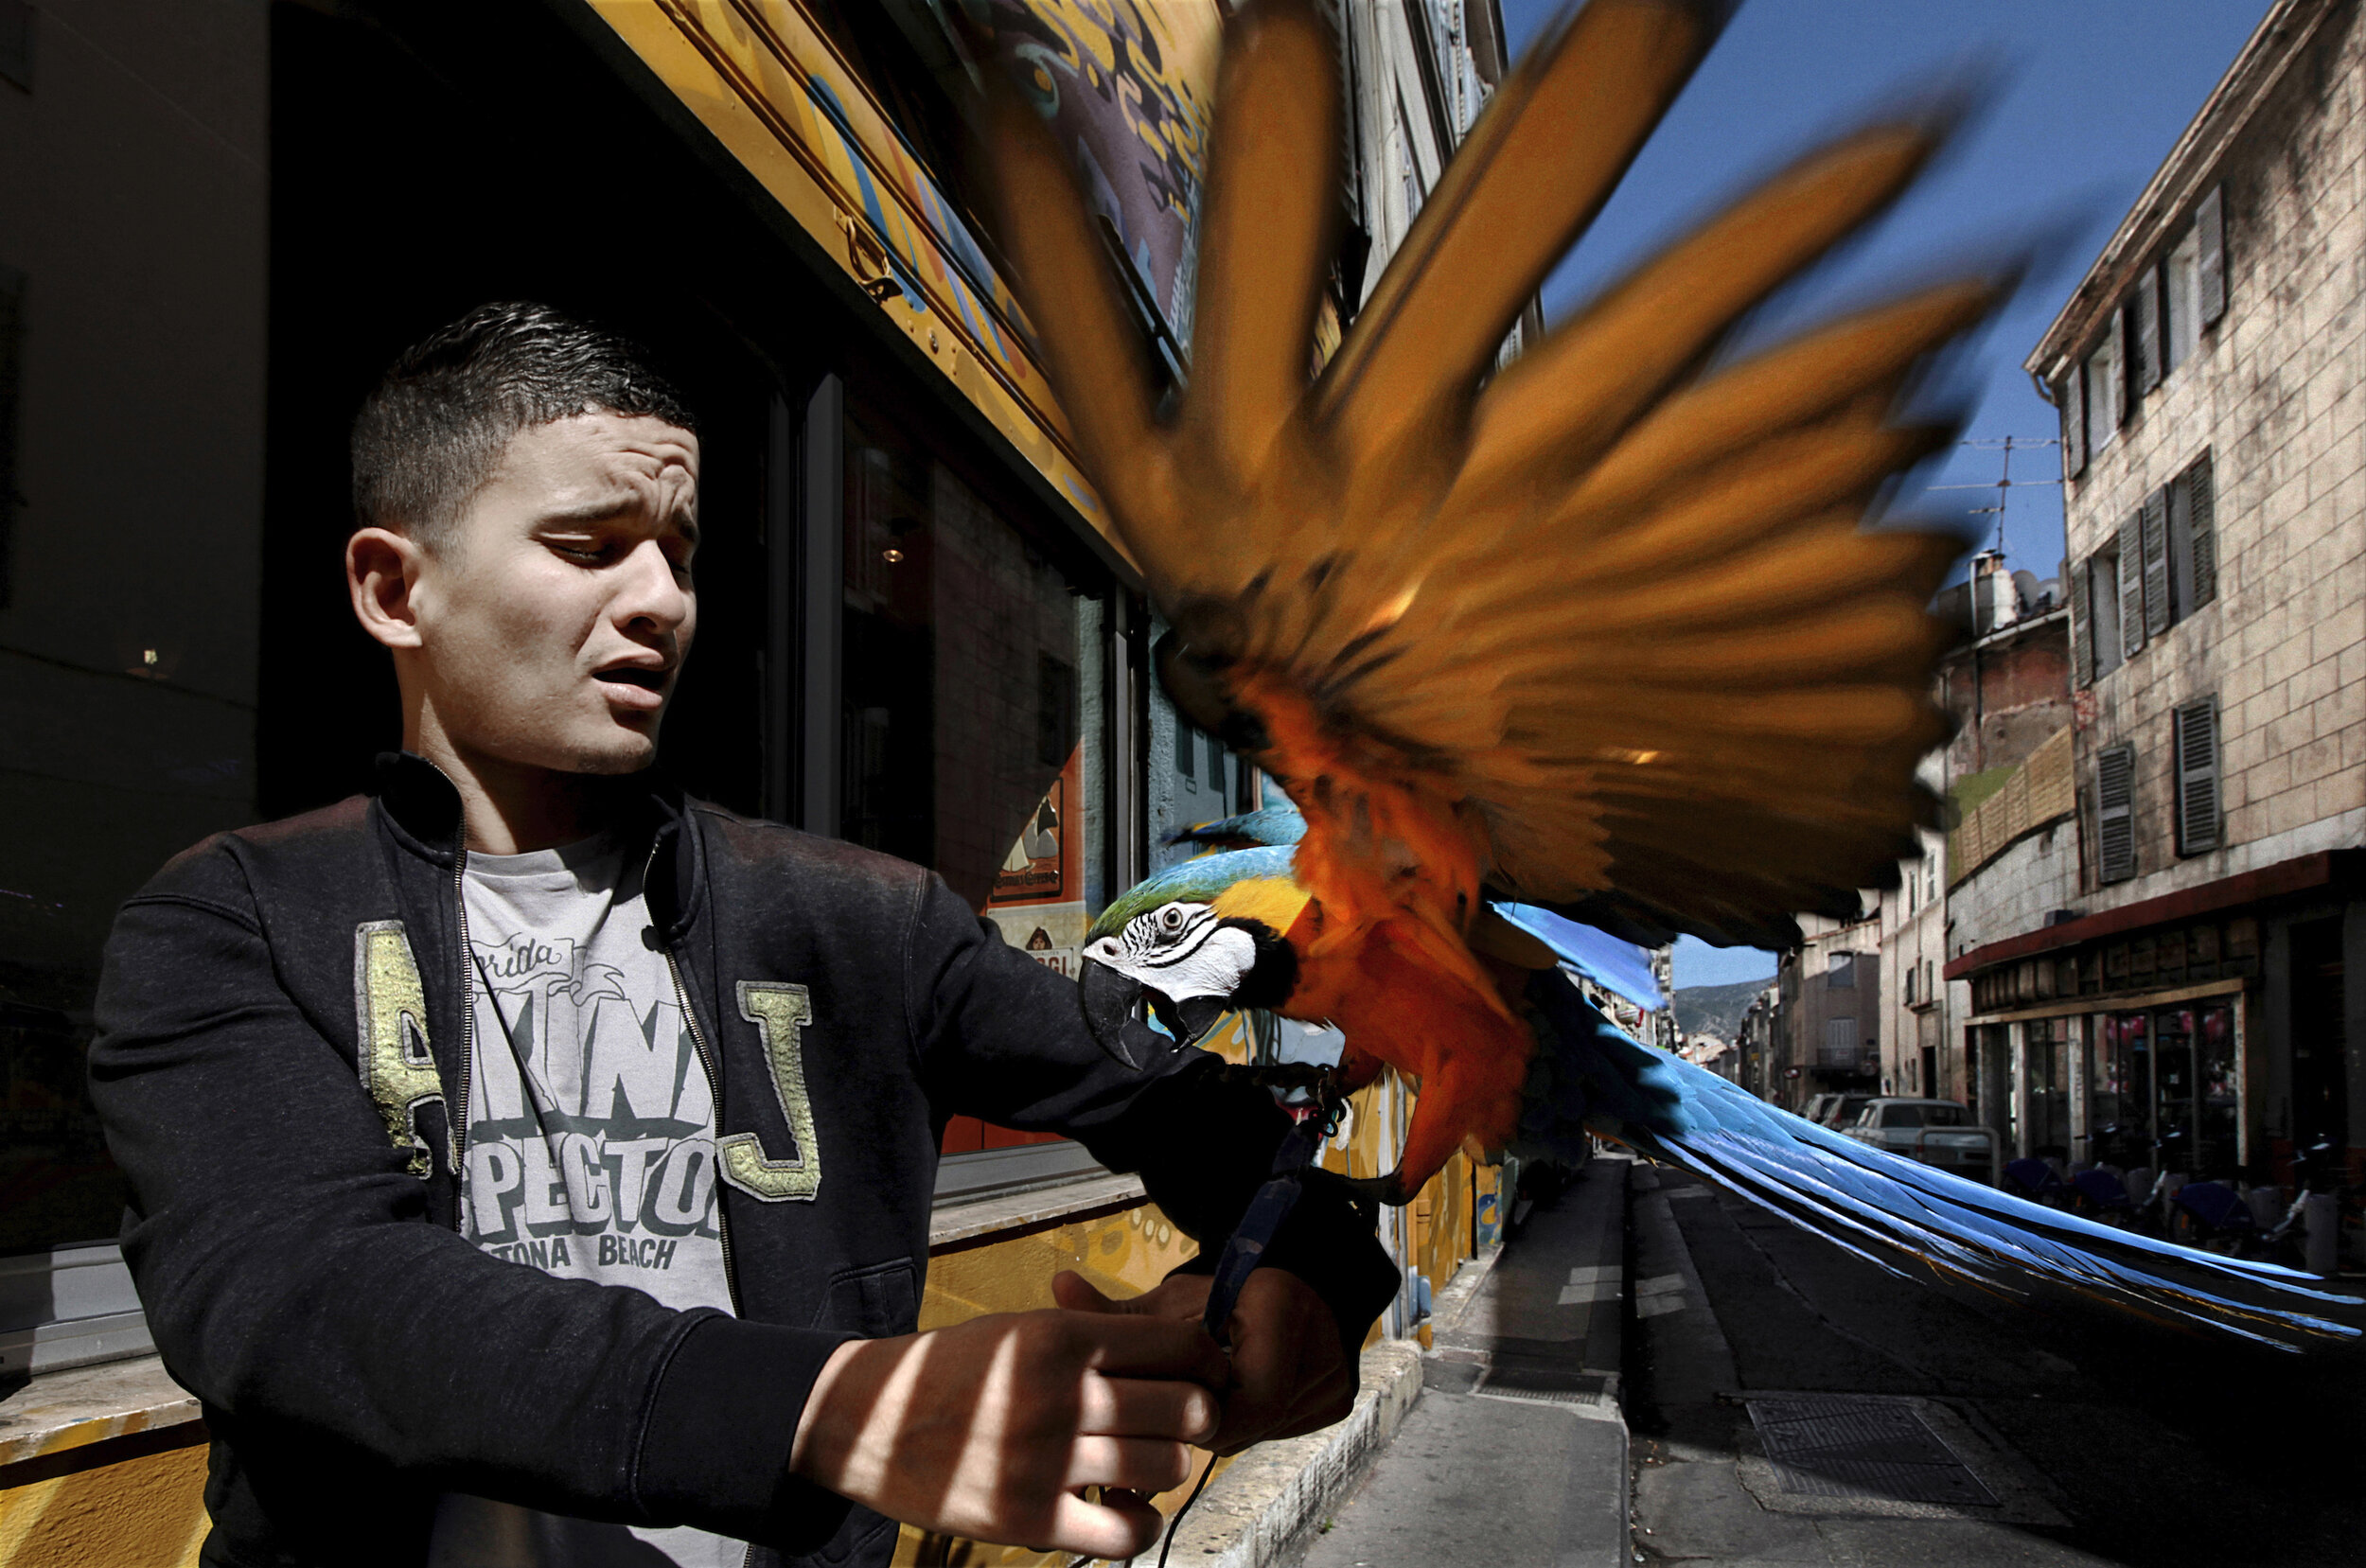   France. Marseille. 2014. A young man and his blue-and-gold macaw in a street near Place Jean Jaurès.            